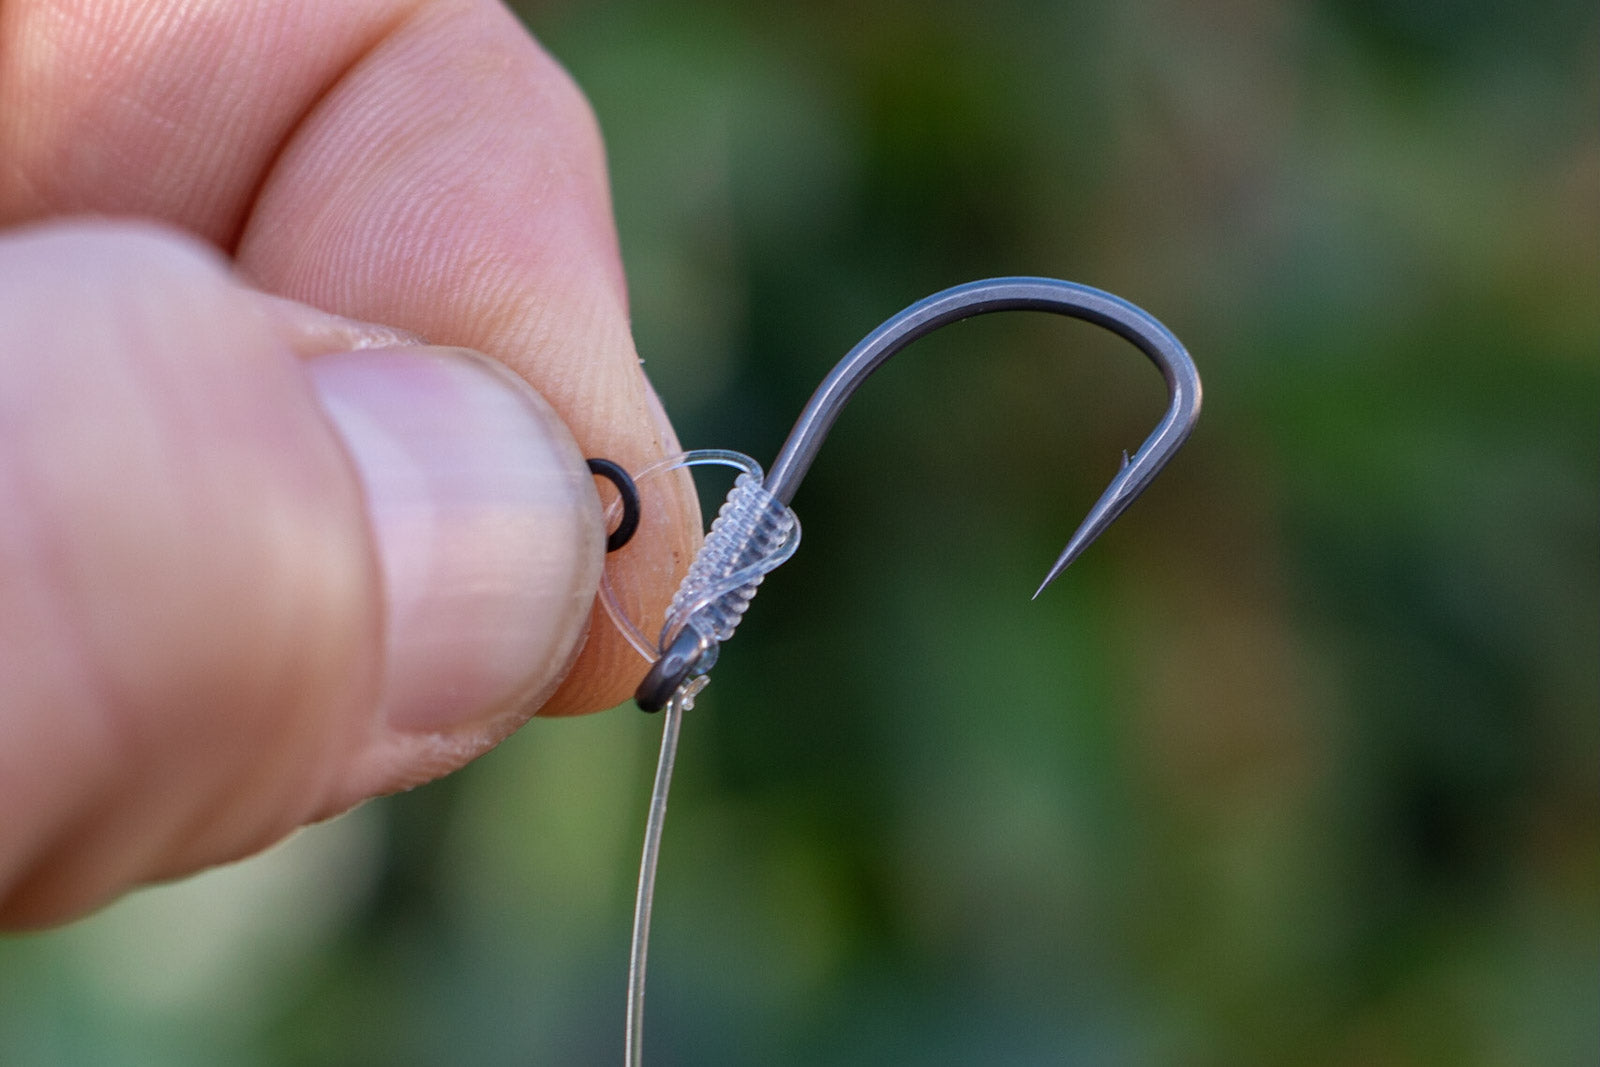 A Classic Chod rig tied with a size 5 Duropoint Chod hook, Revolve chod rig filament and an anti glare large Rig ring. A real big carp rig. Still the best Popup pattern in 2022